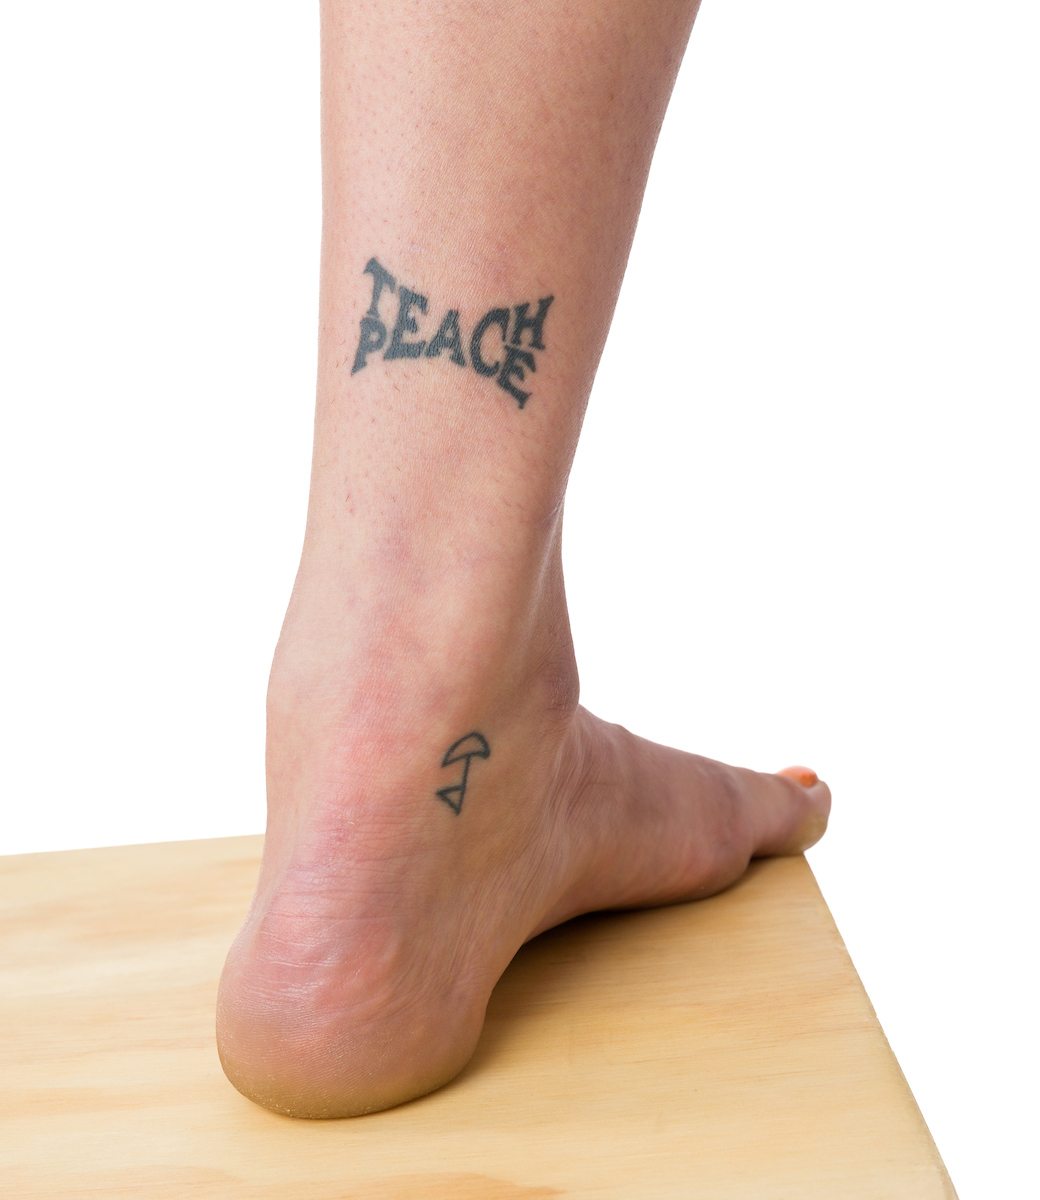 A young woman's ankle, featuring a tattoo that reads "Teach Peace"